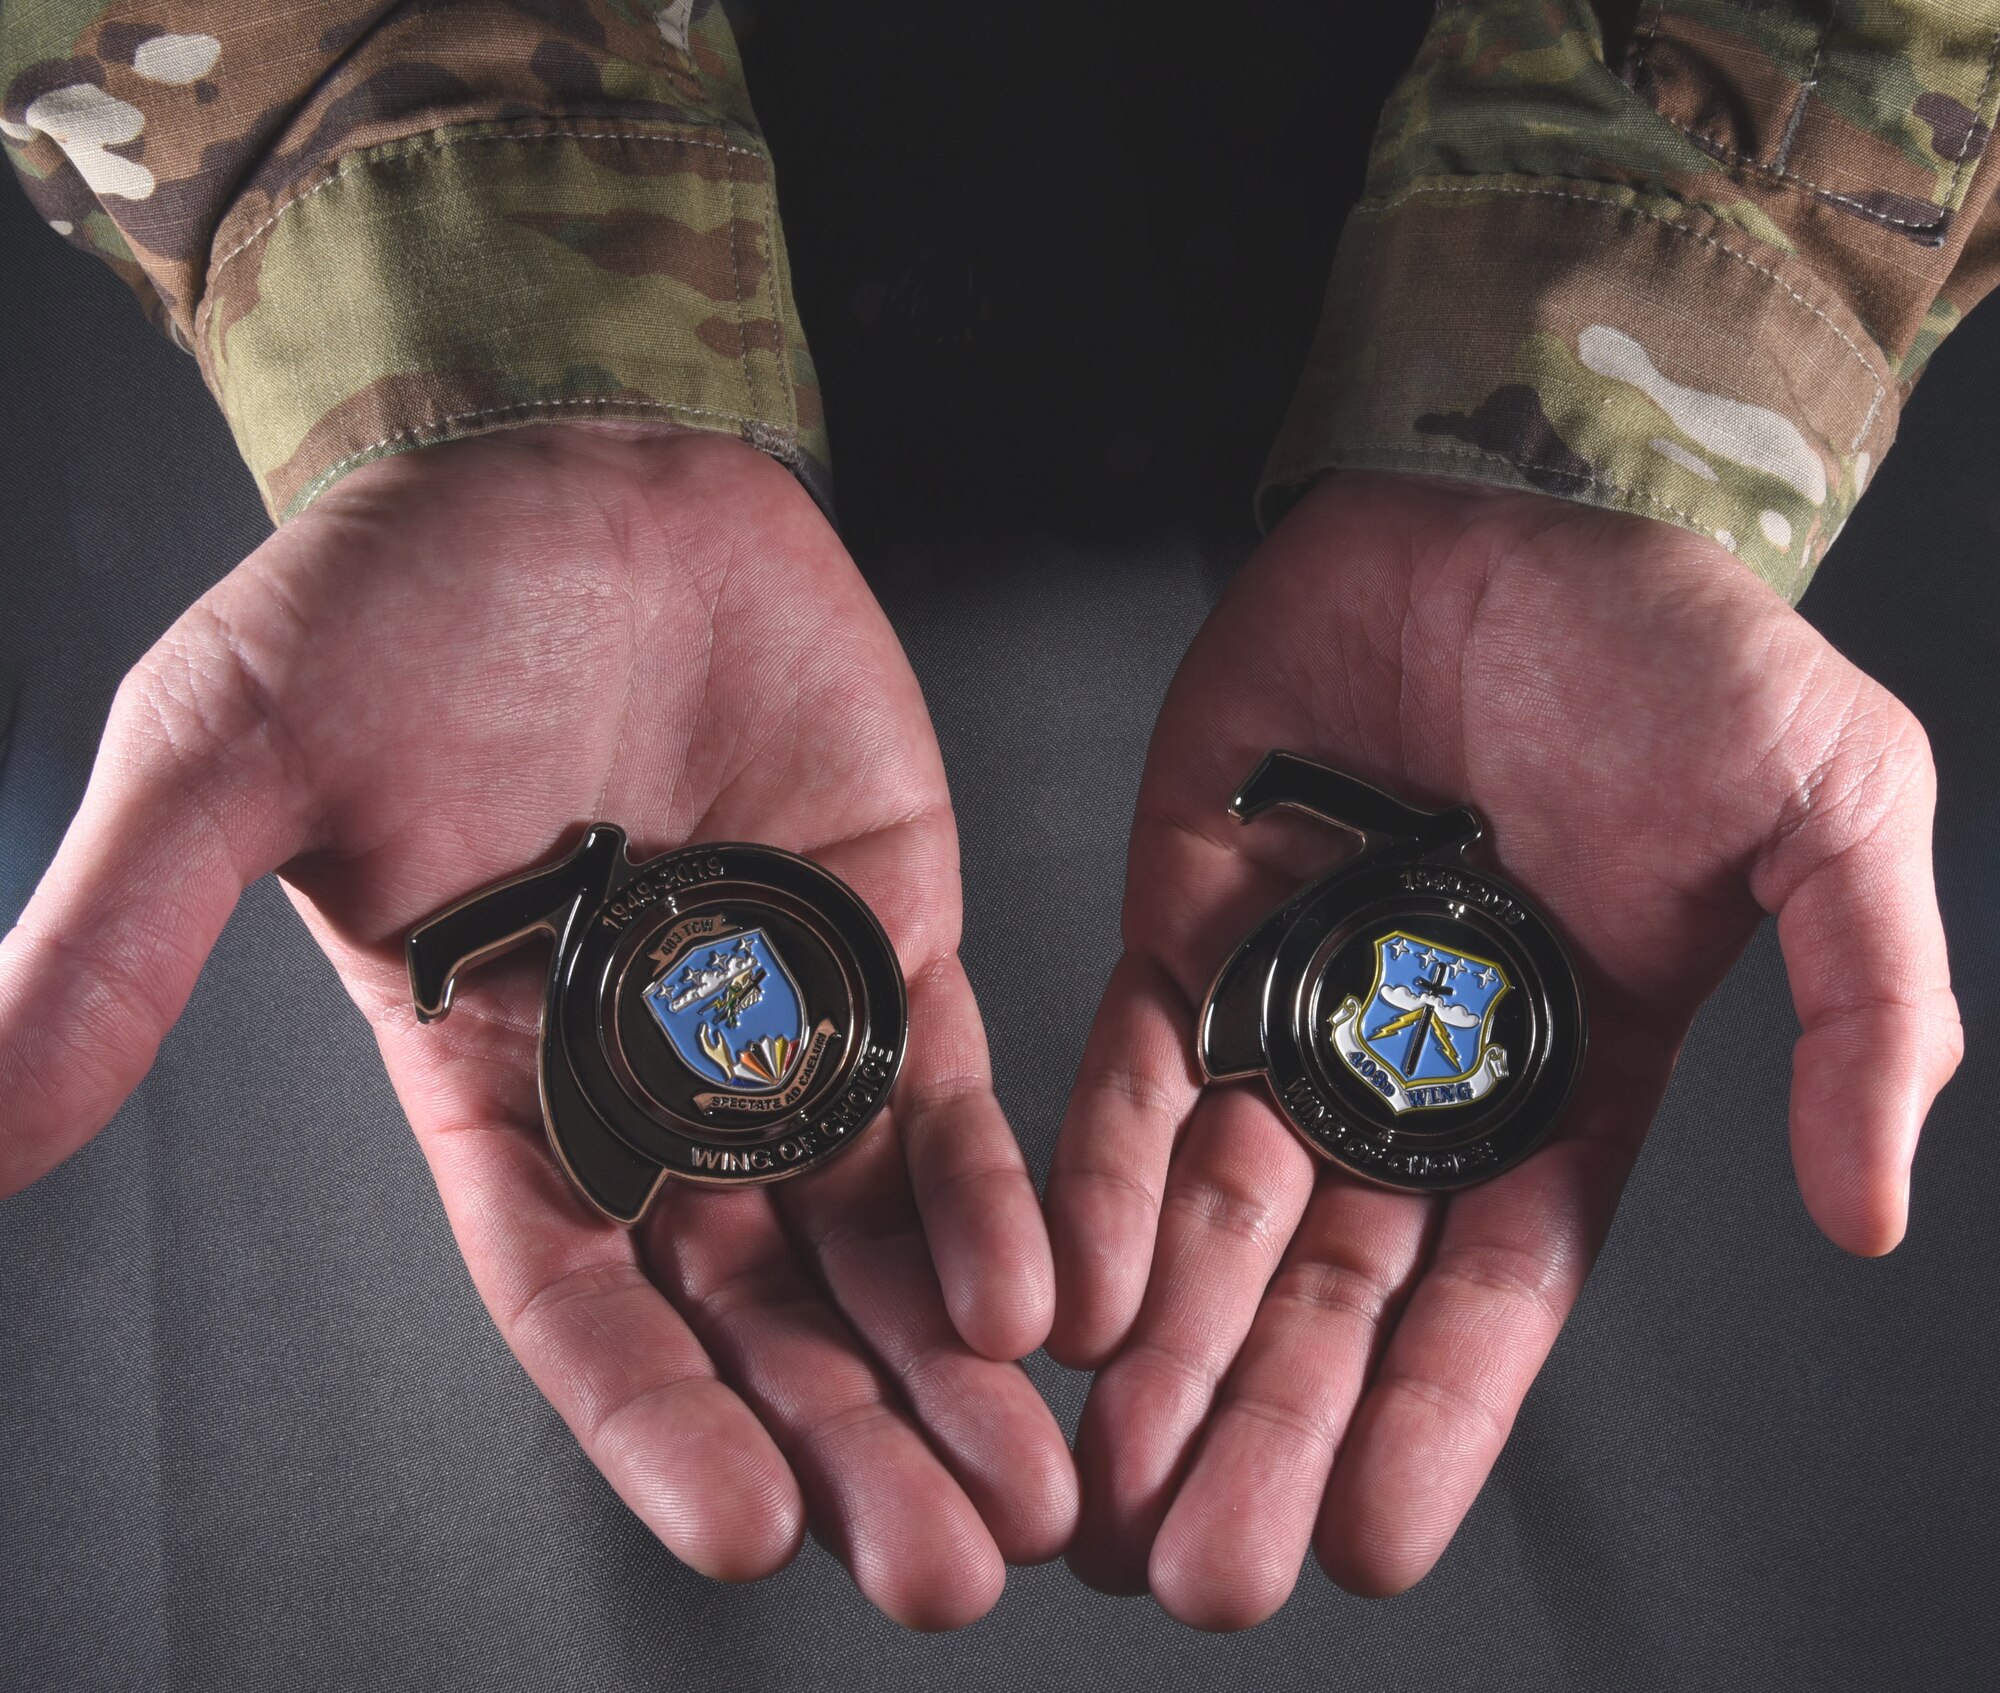 Tech. Sgt. Christopher Carranza, a public affairs specialist for the 403rd Wing at Keesler Air Force Base, Miss., displays the two sides of the wing's 70th anniversary coins. The chief's group within the unit designed the coins using the original 1953 shield and the present shield. (U.S. Air Force photo by Senior Airman Kristen Pittman)